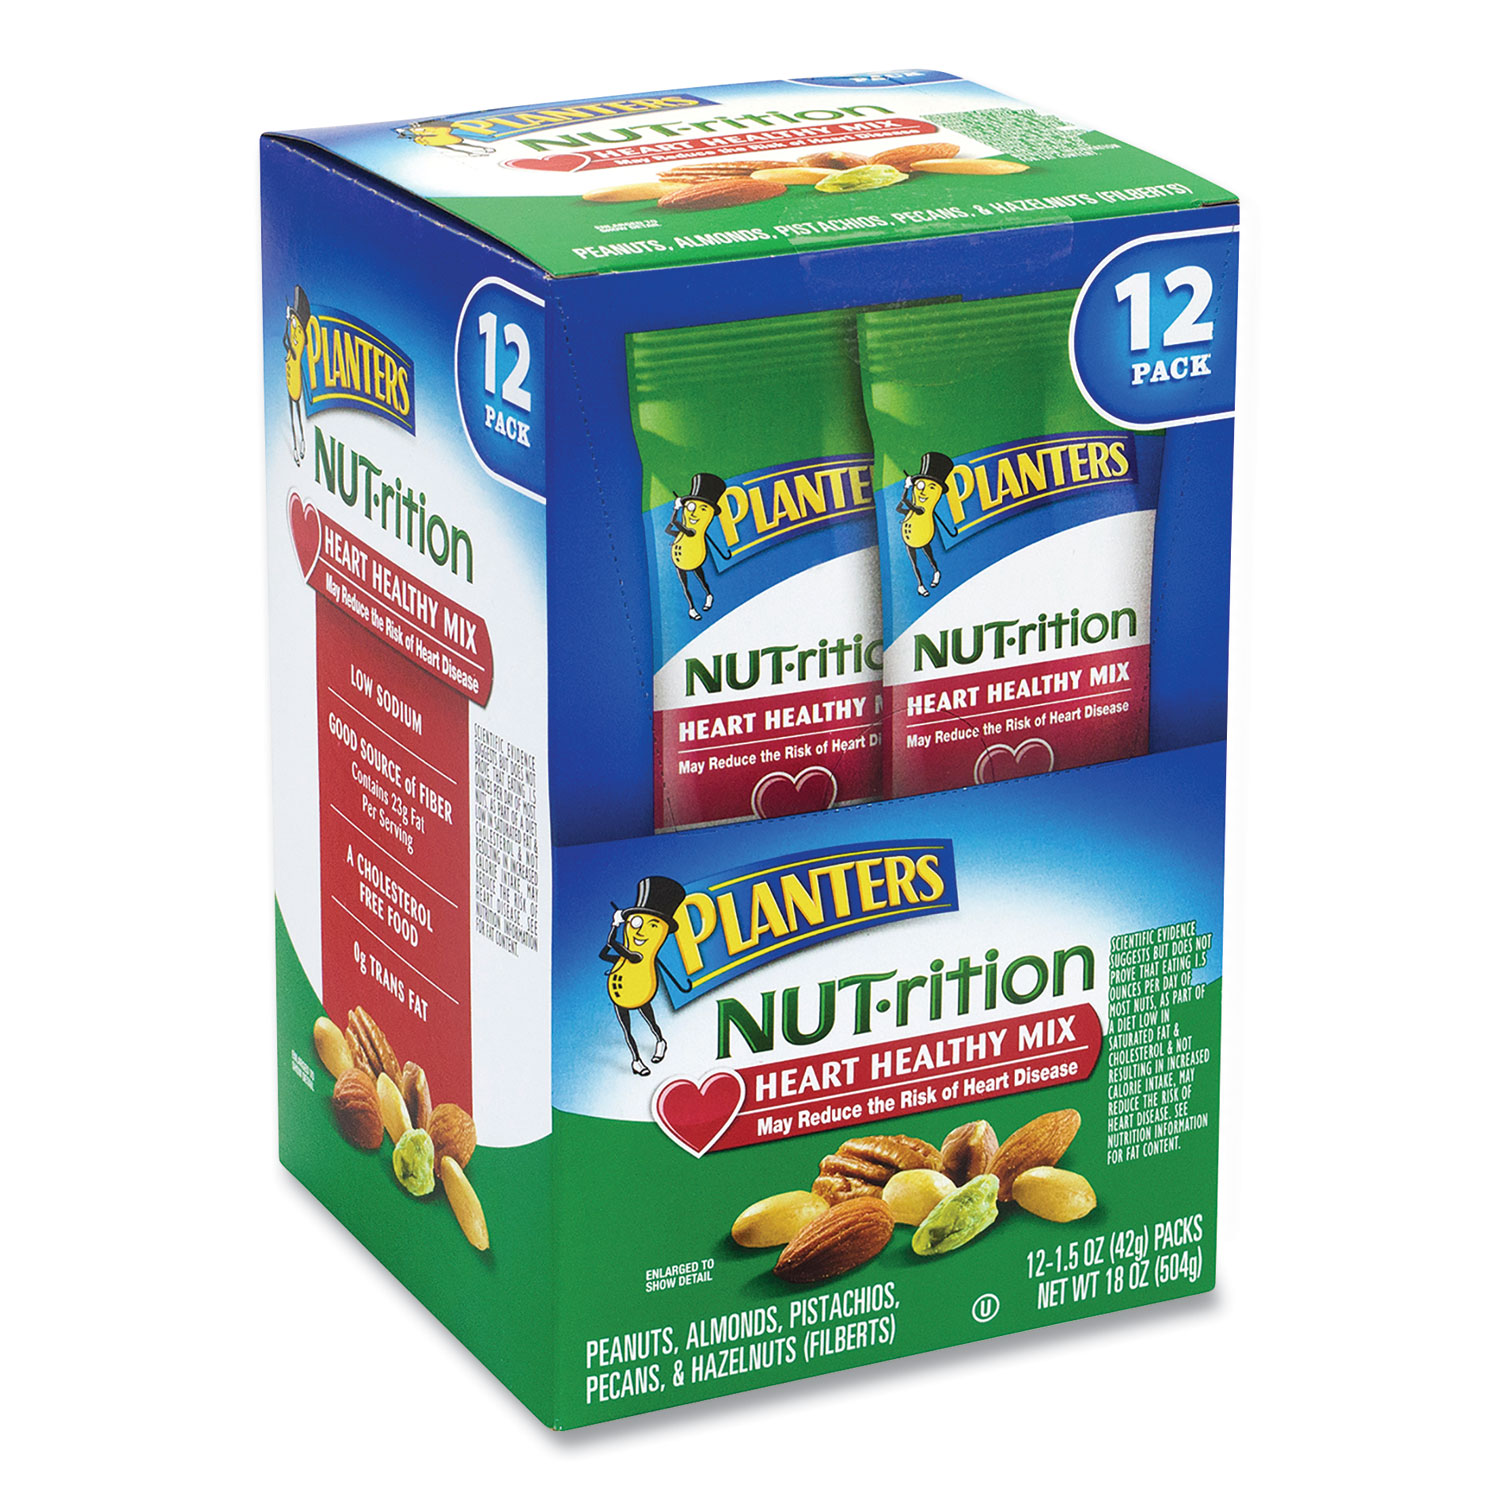  Planters 29169 NUT-rition Heart Healthy Mix, 1.5 oz Tube, 12 Tubes/Box, Free Delivery in 1-4 Business Days (GRR22000496) 